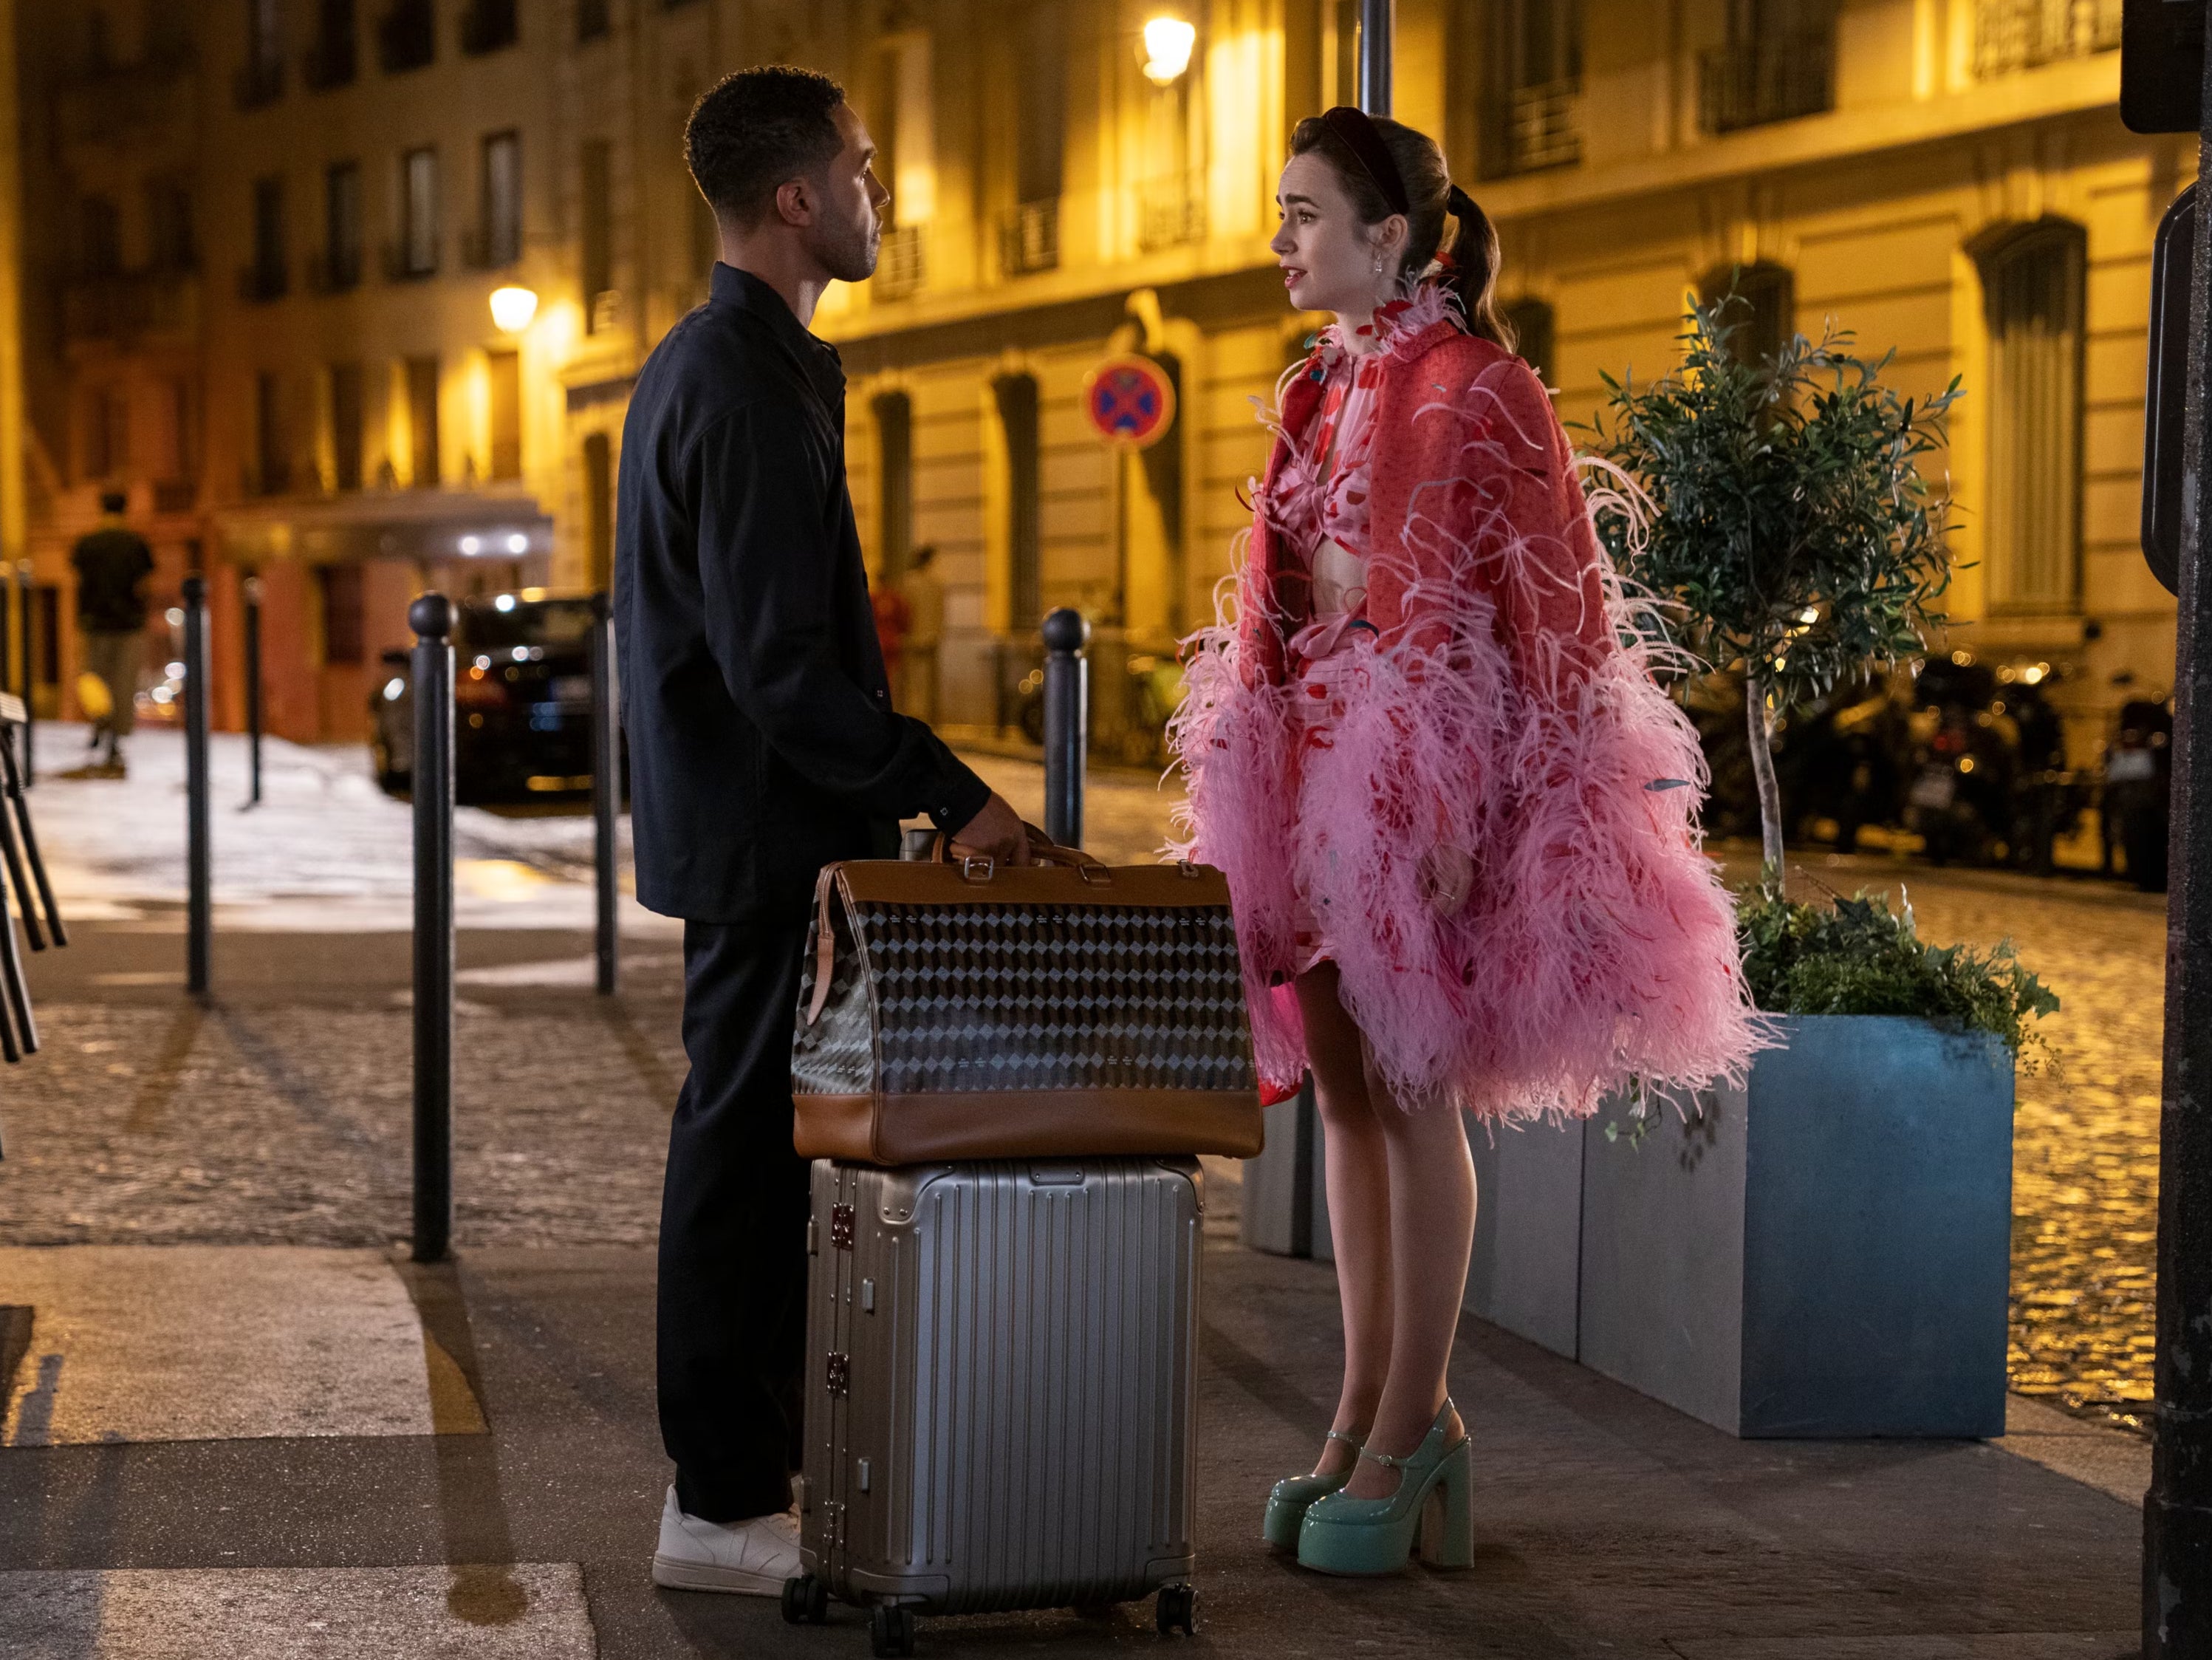 Emily in Paris sells the romance of the city